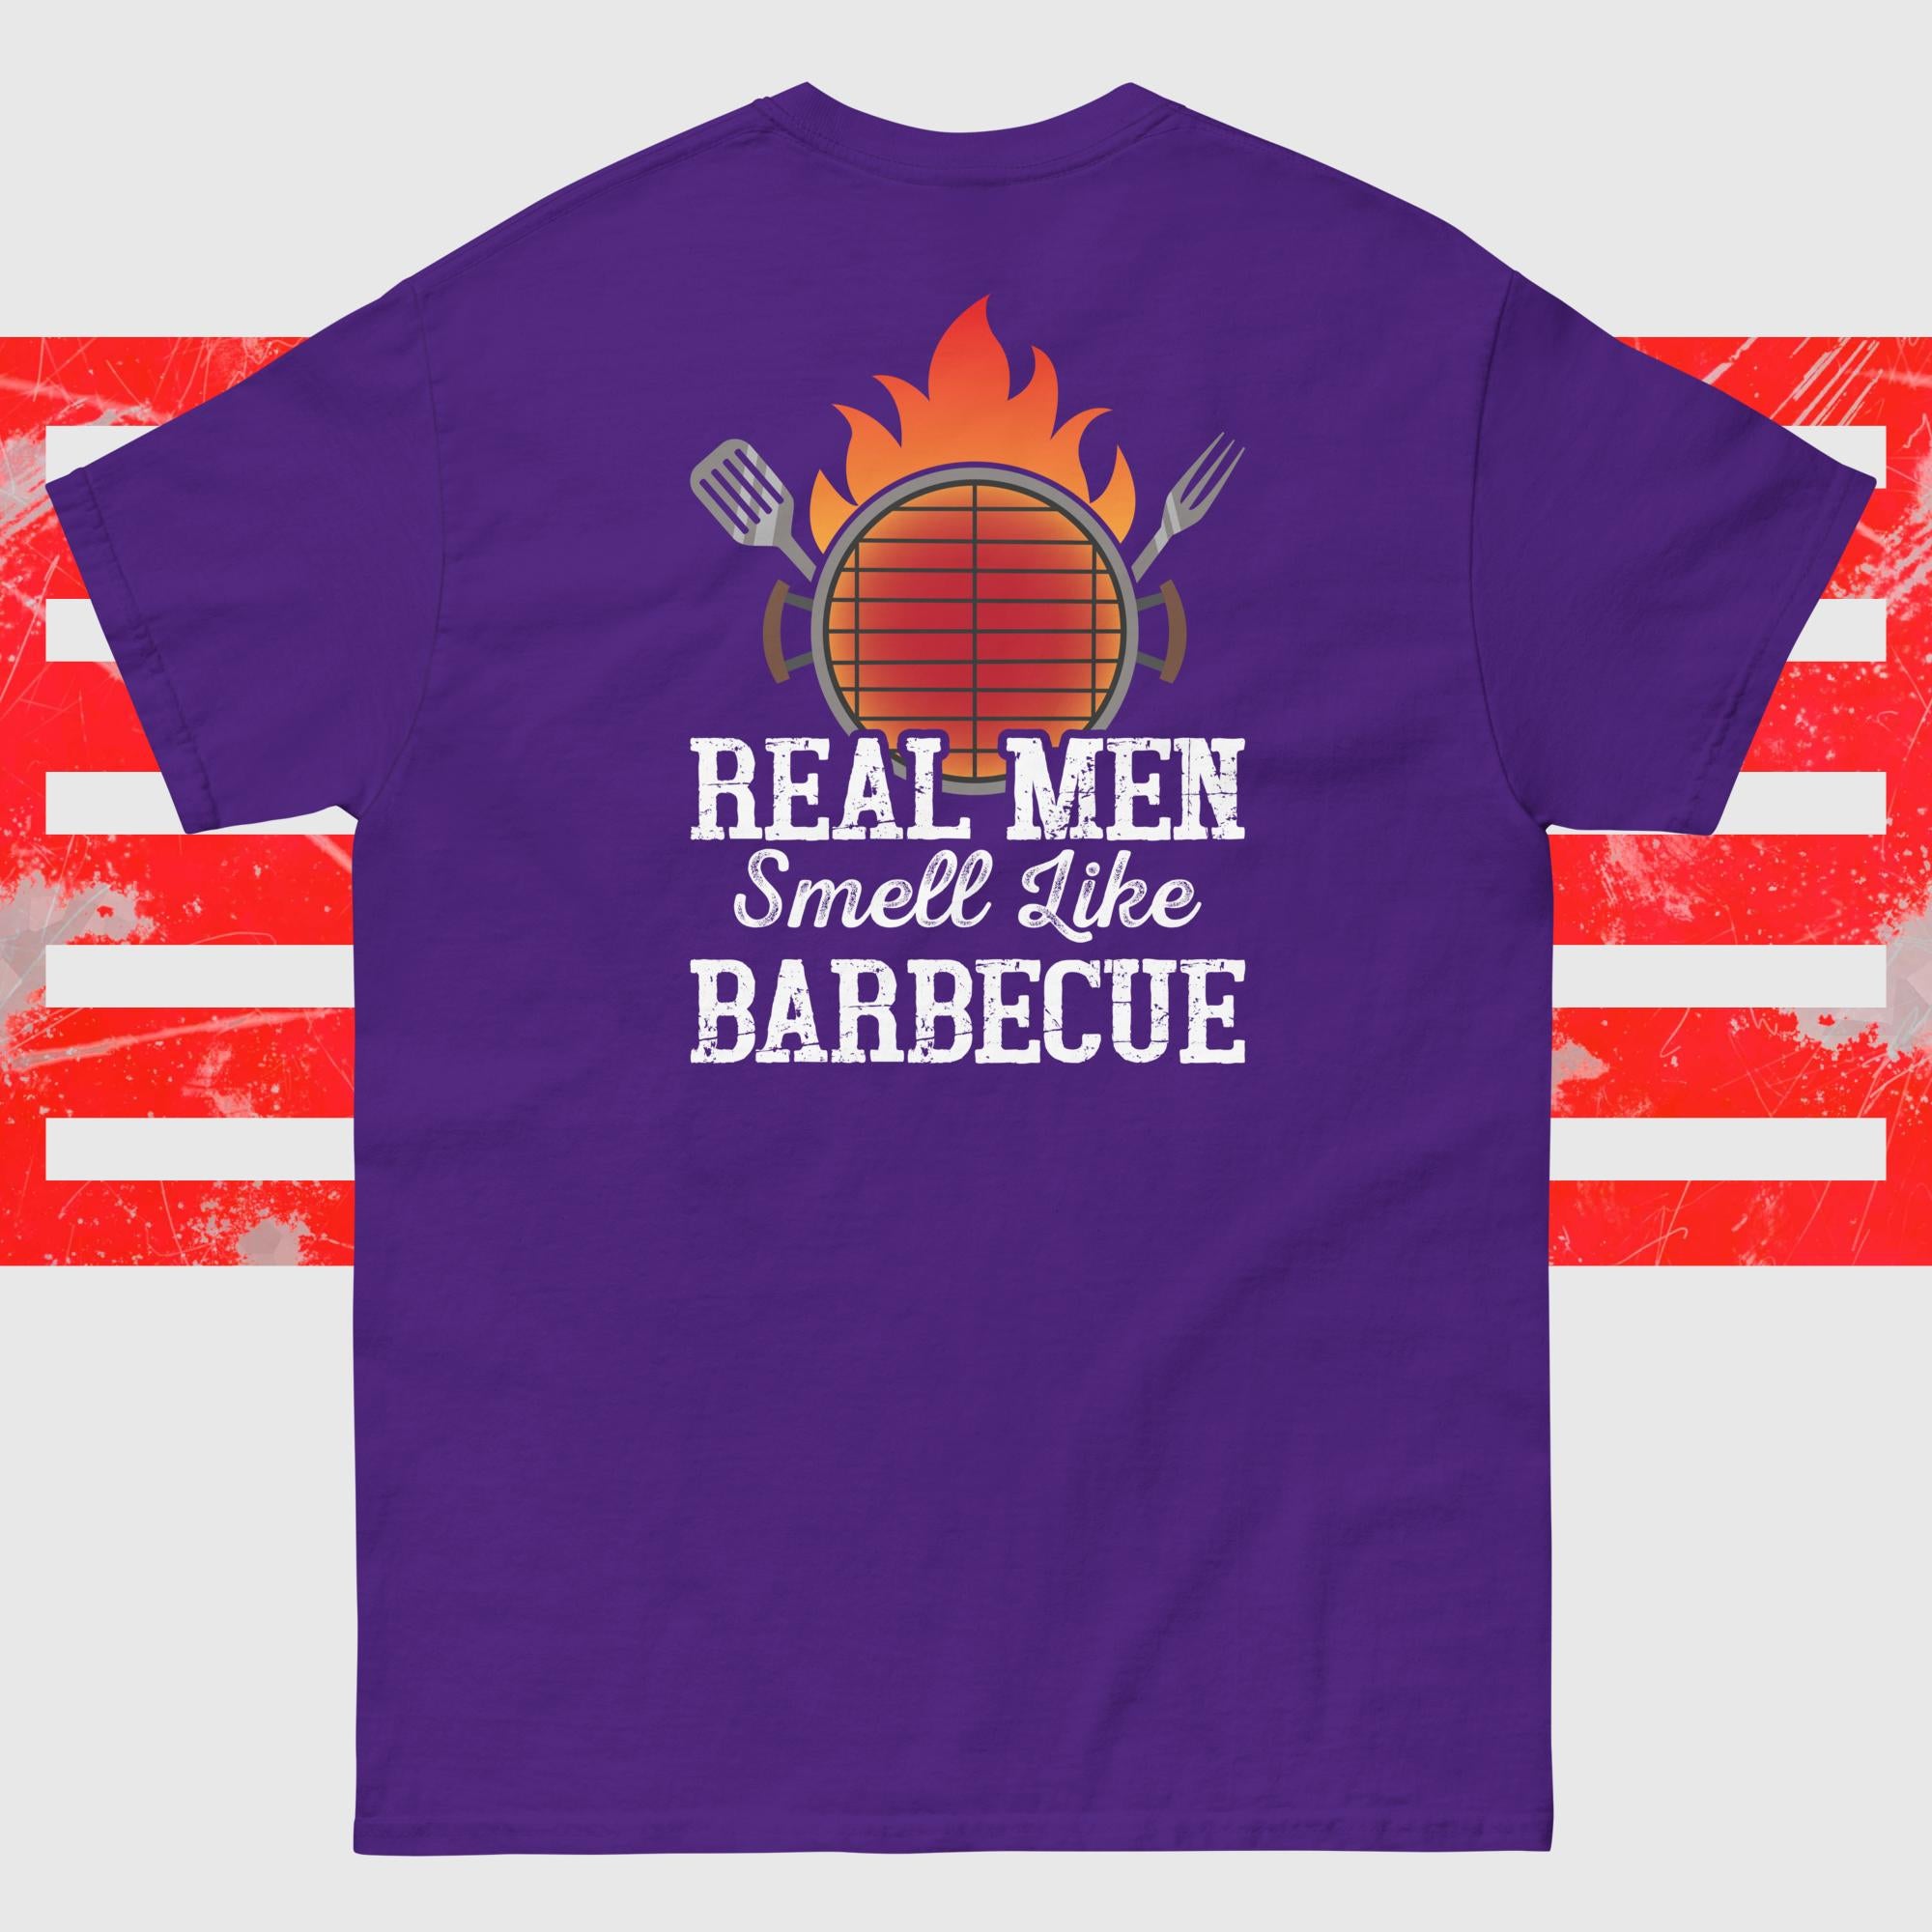 REAL MEN SMELL LIKE BBQ